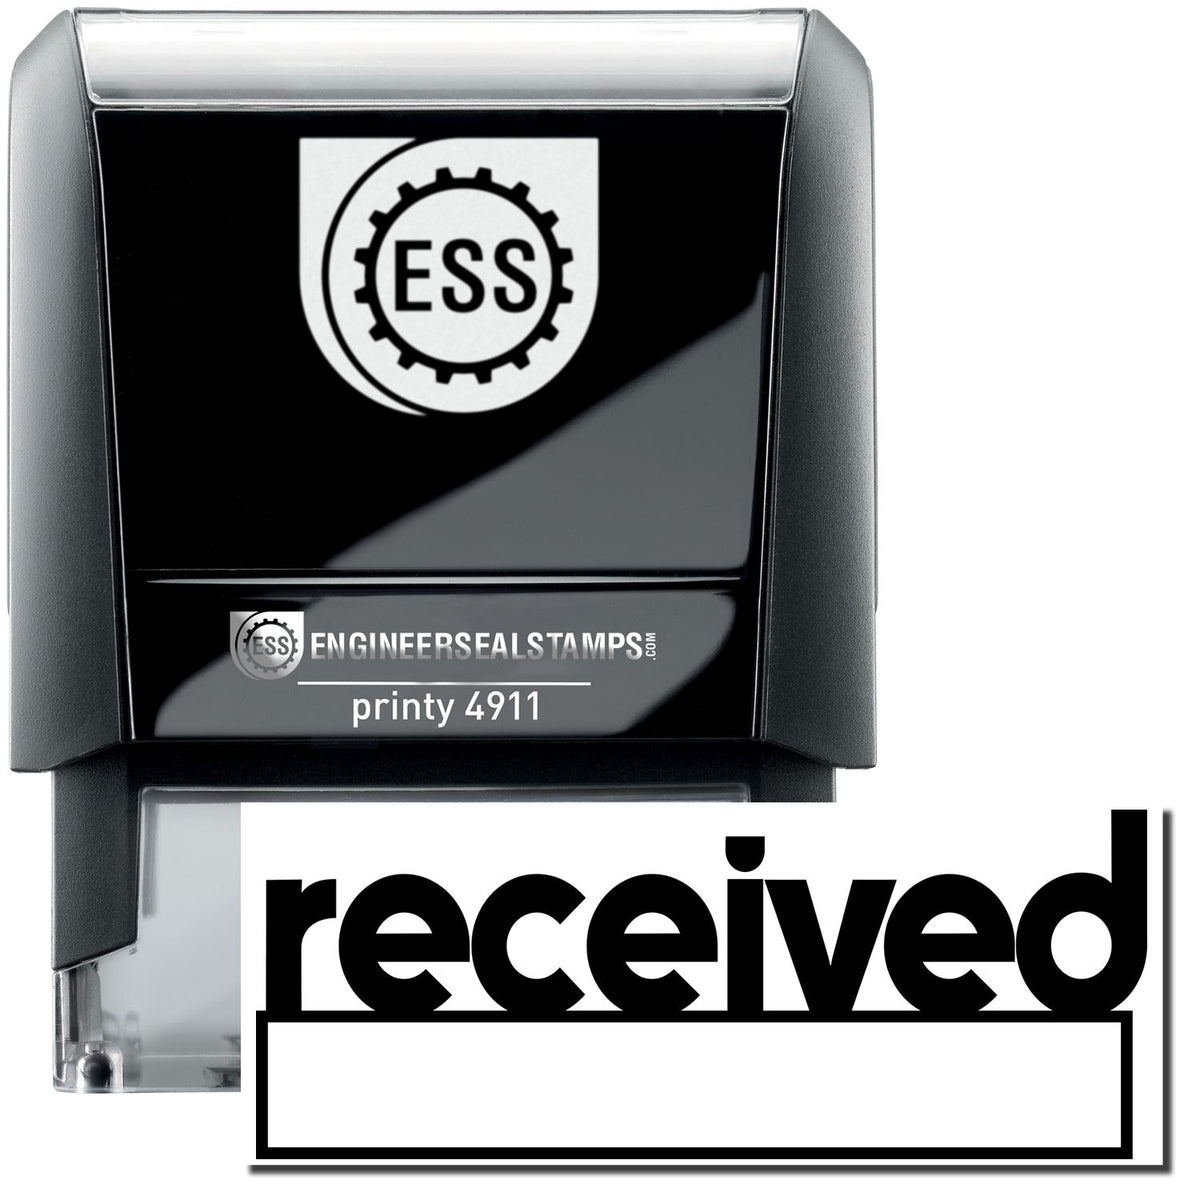 A self-inking stamp with a stamped image showing how the text &quot;received&quot; in lowercase with a date box under it is displayed after stamping.